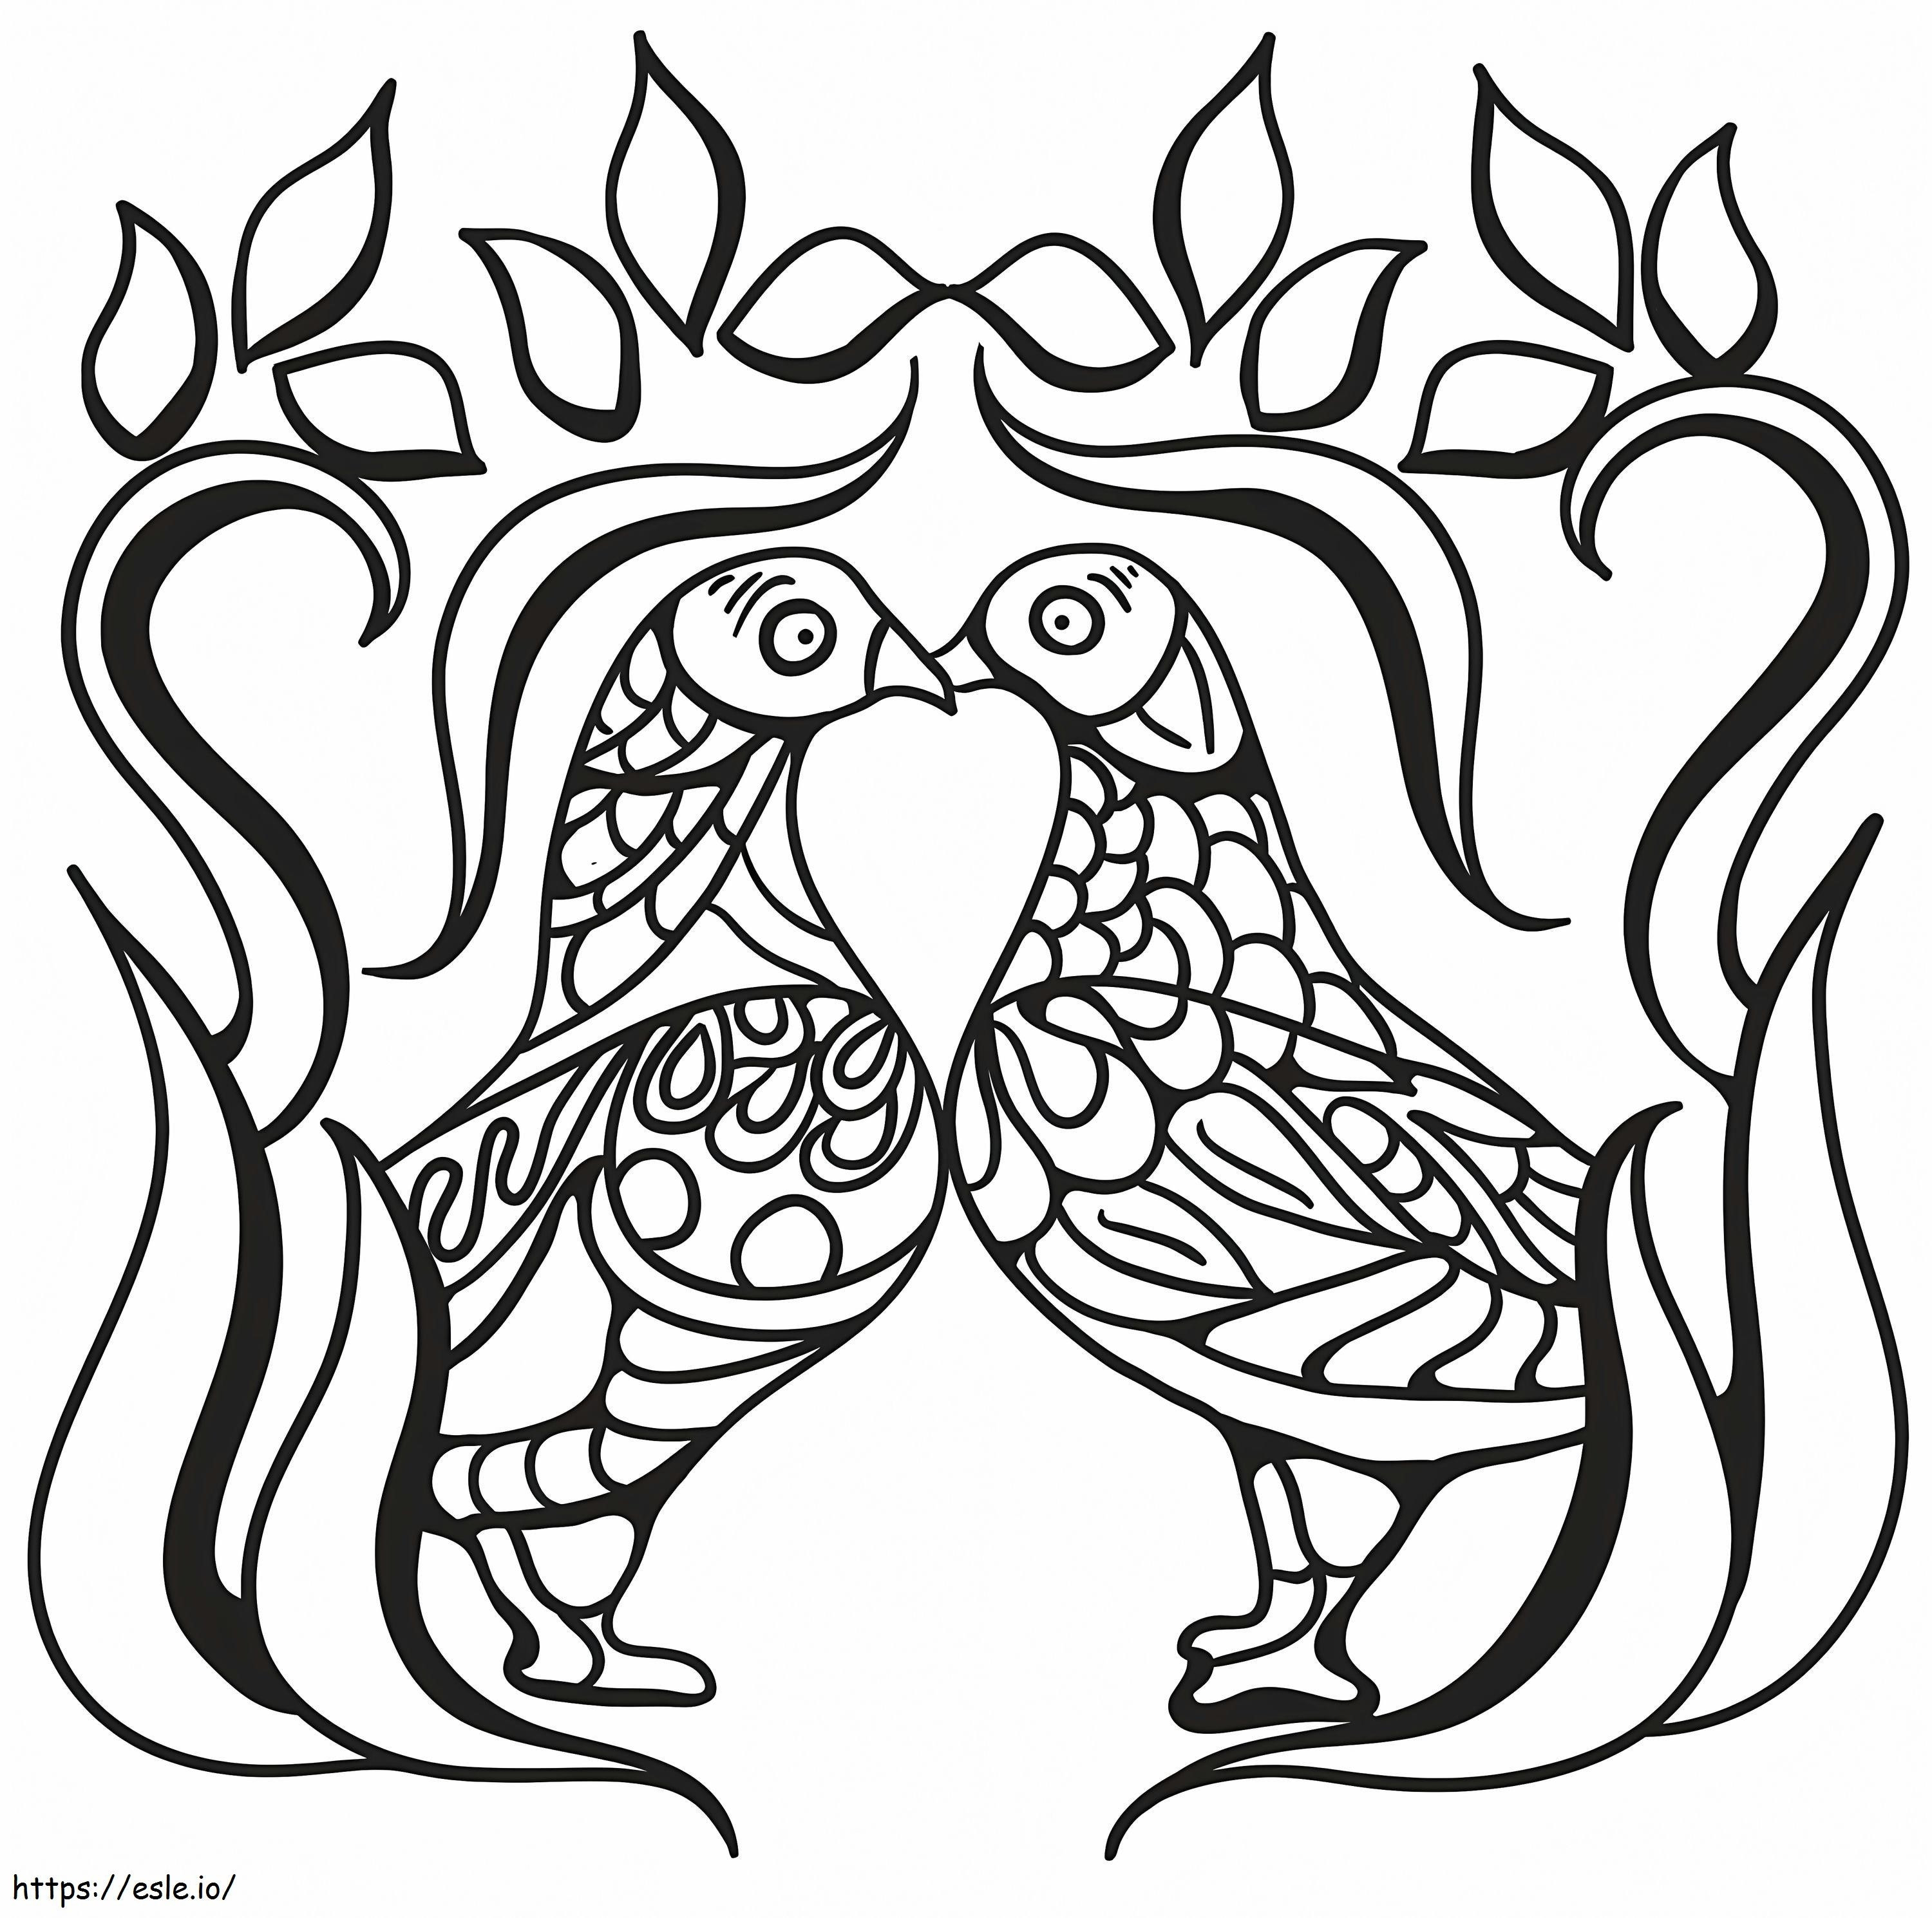 Dove Couple coloring page